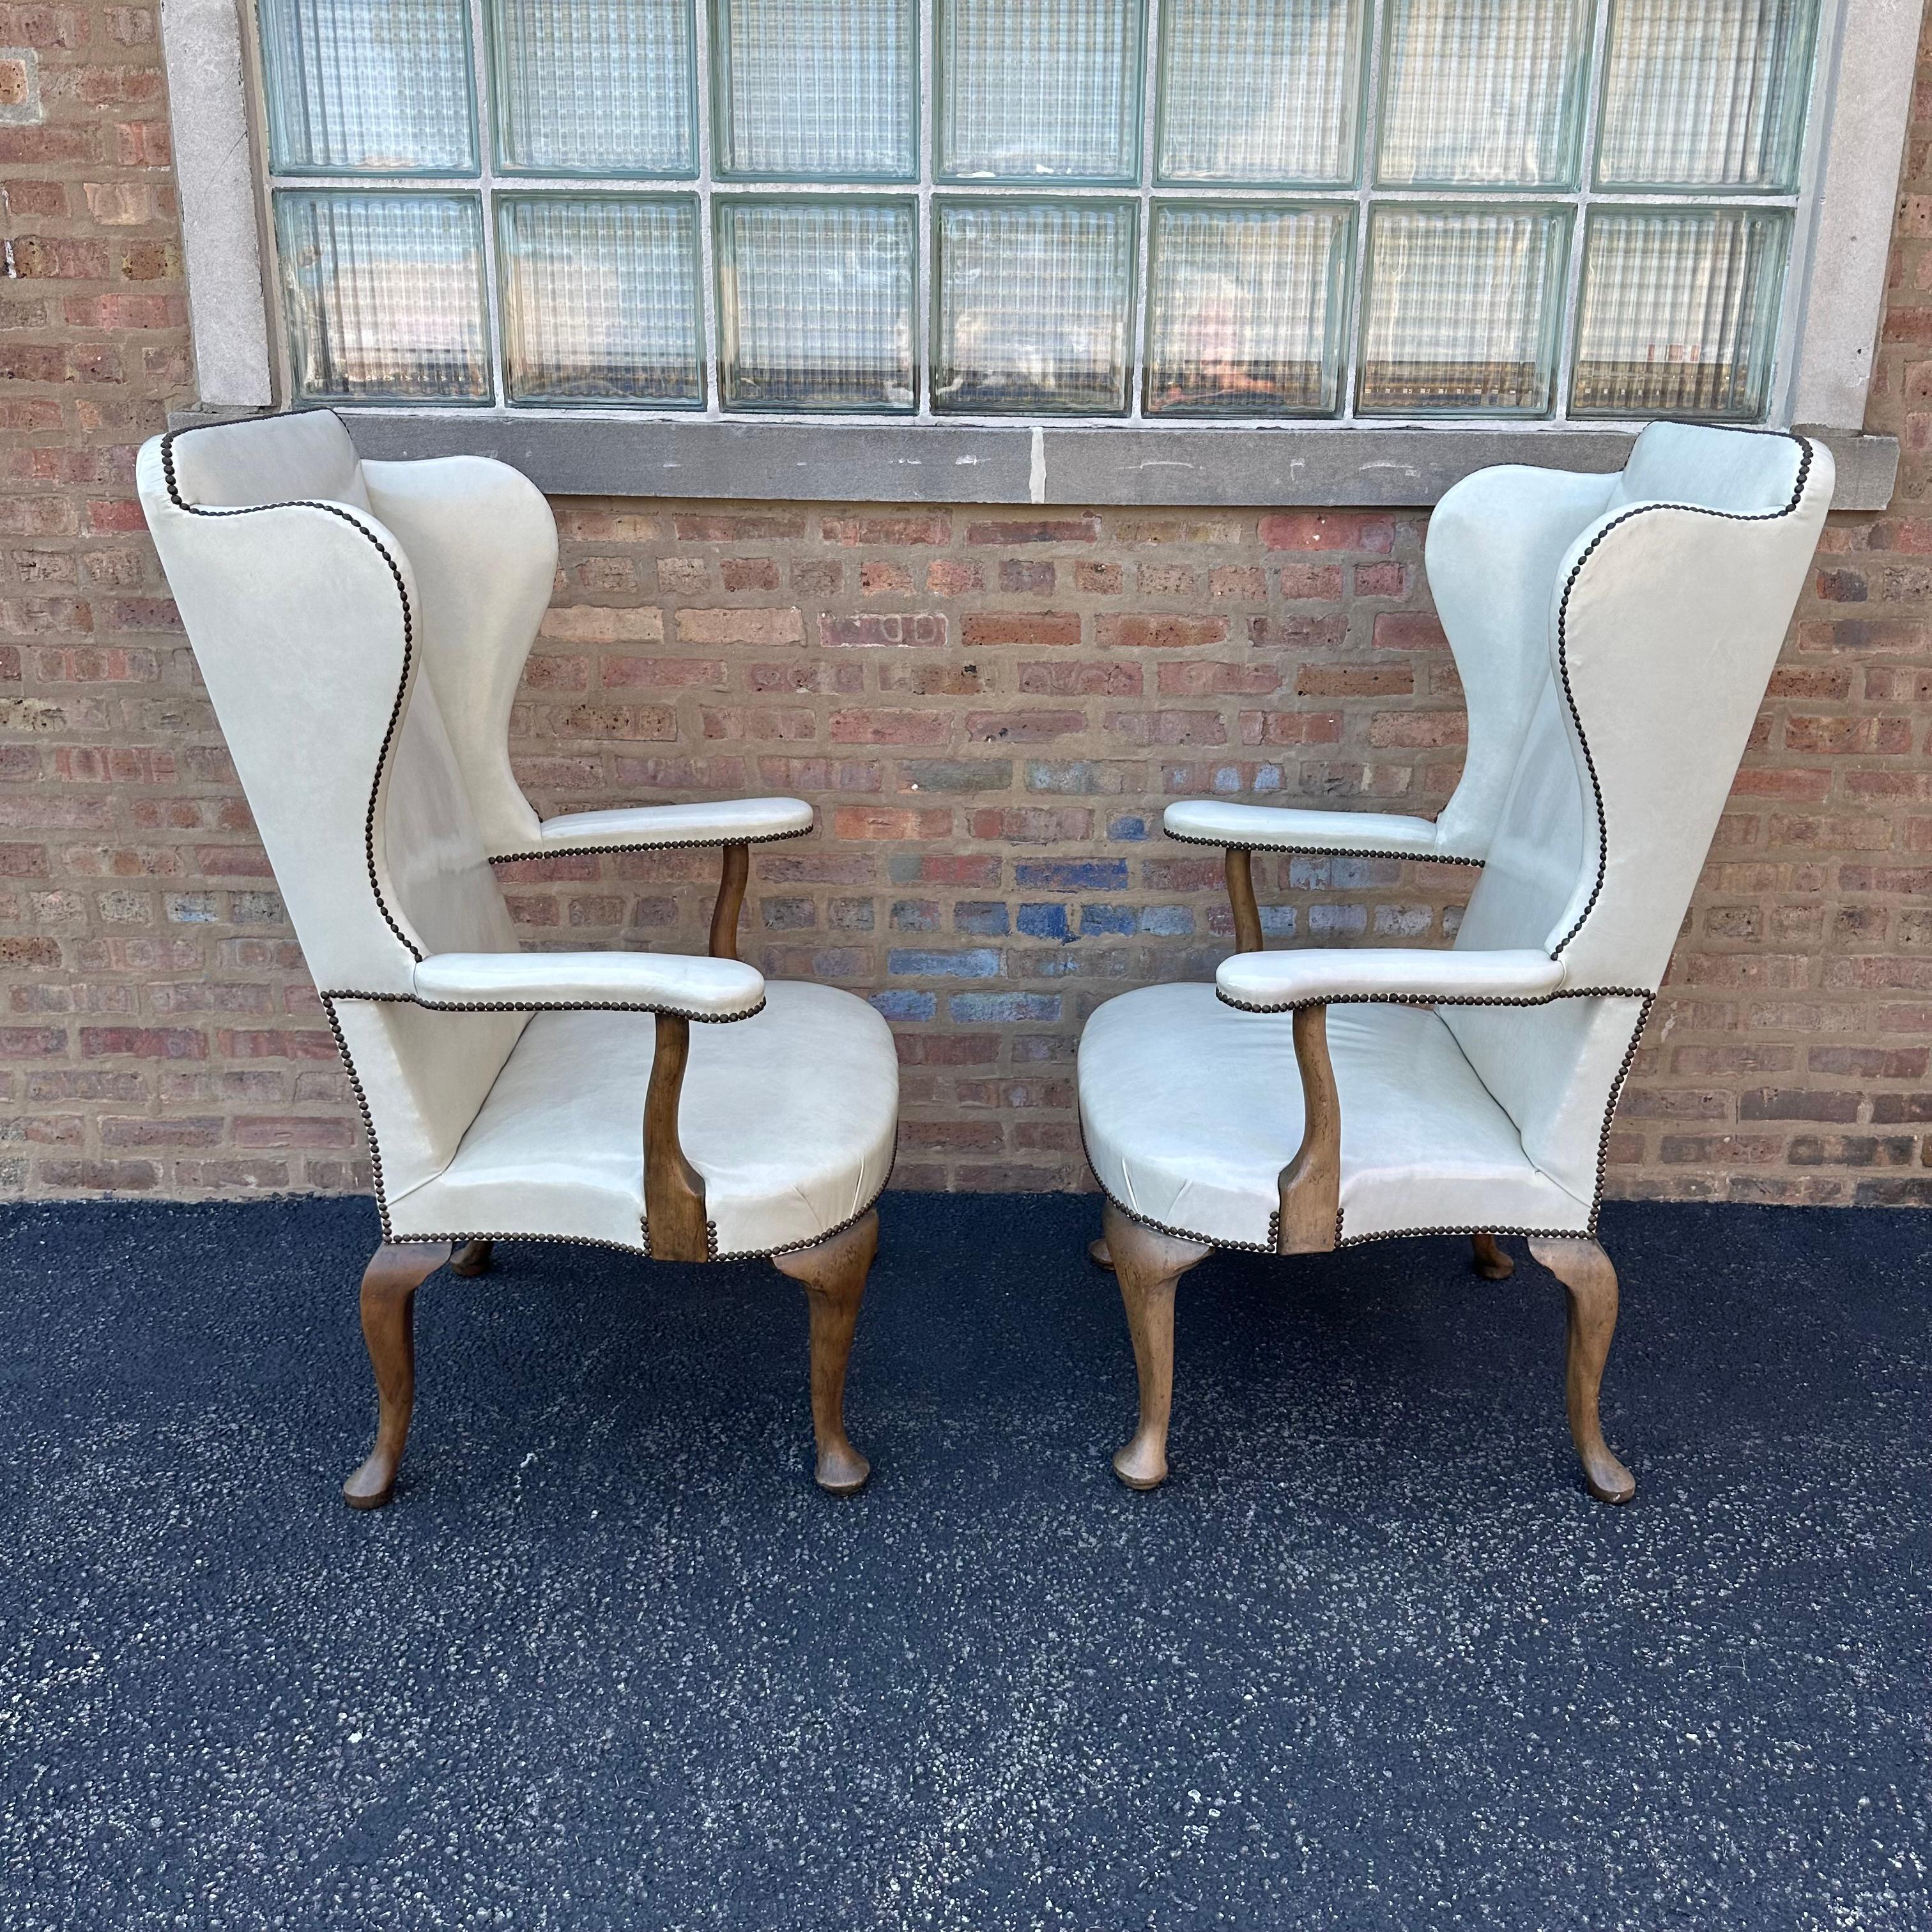 Glossy Leather Wingback Chairs by Richard Himmel Interiors In Good Condition For Sale In Skokie, IL